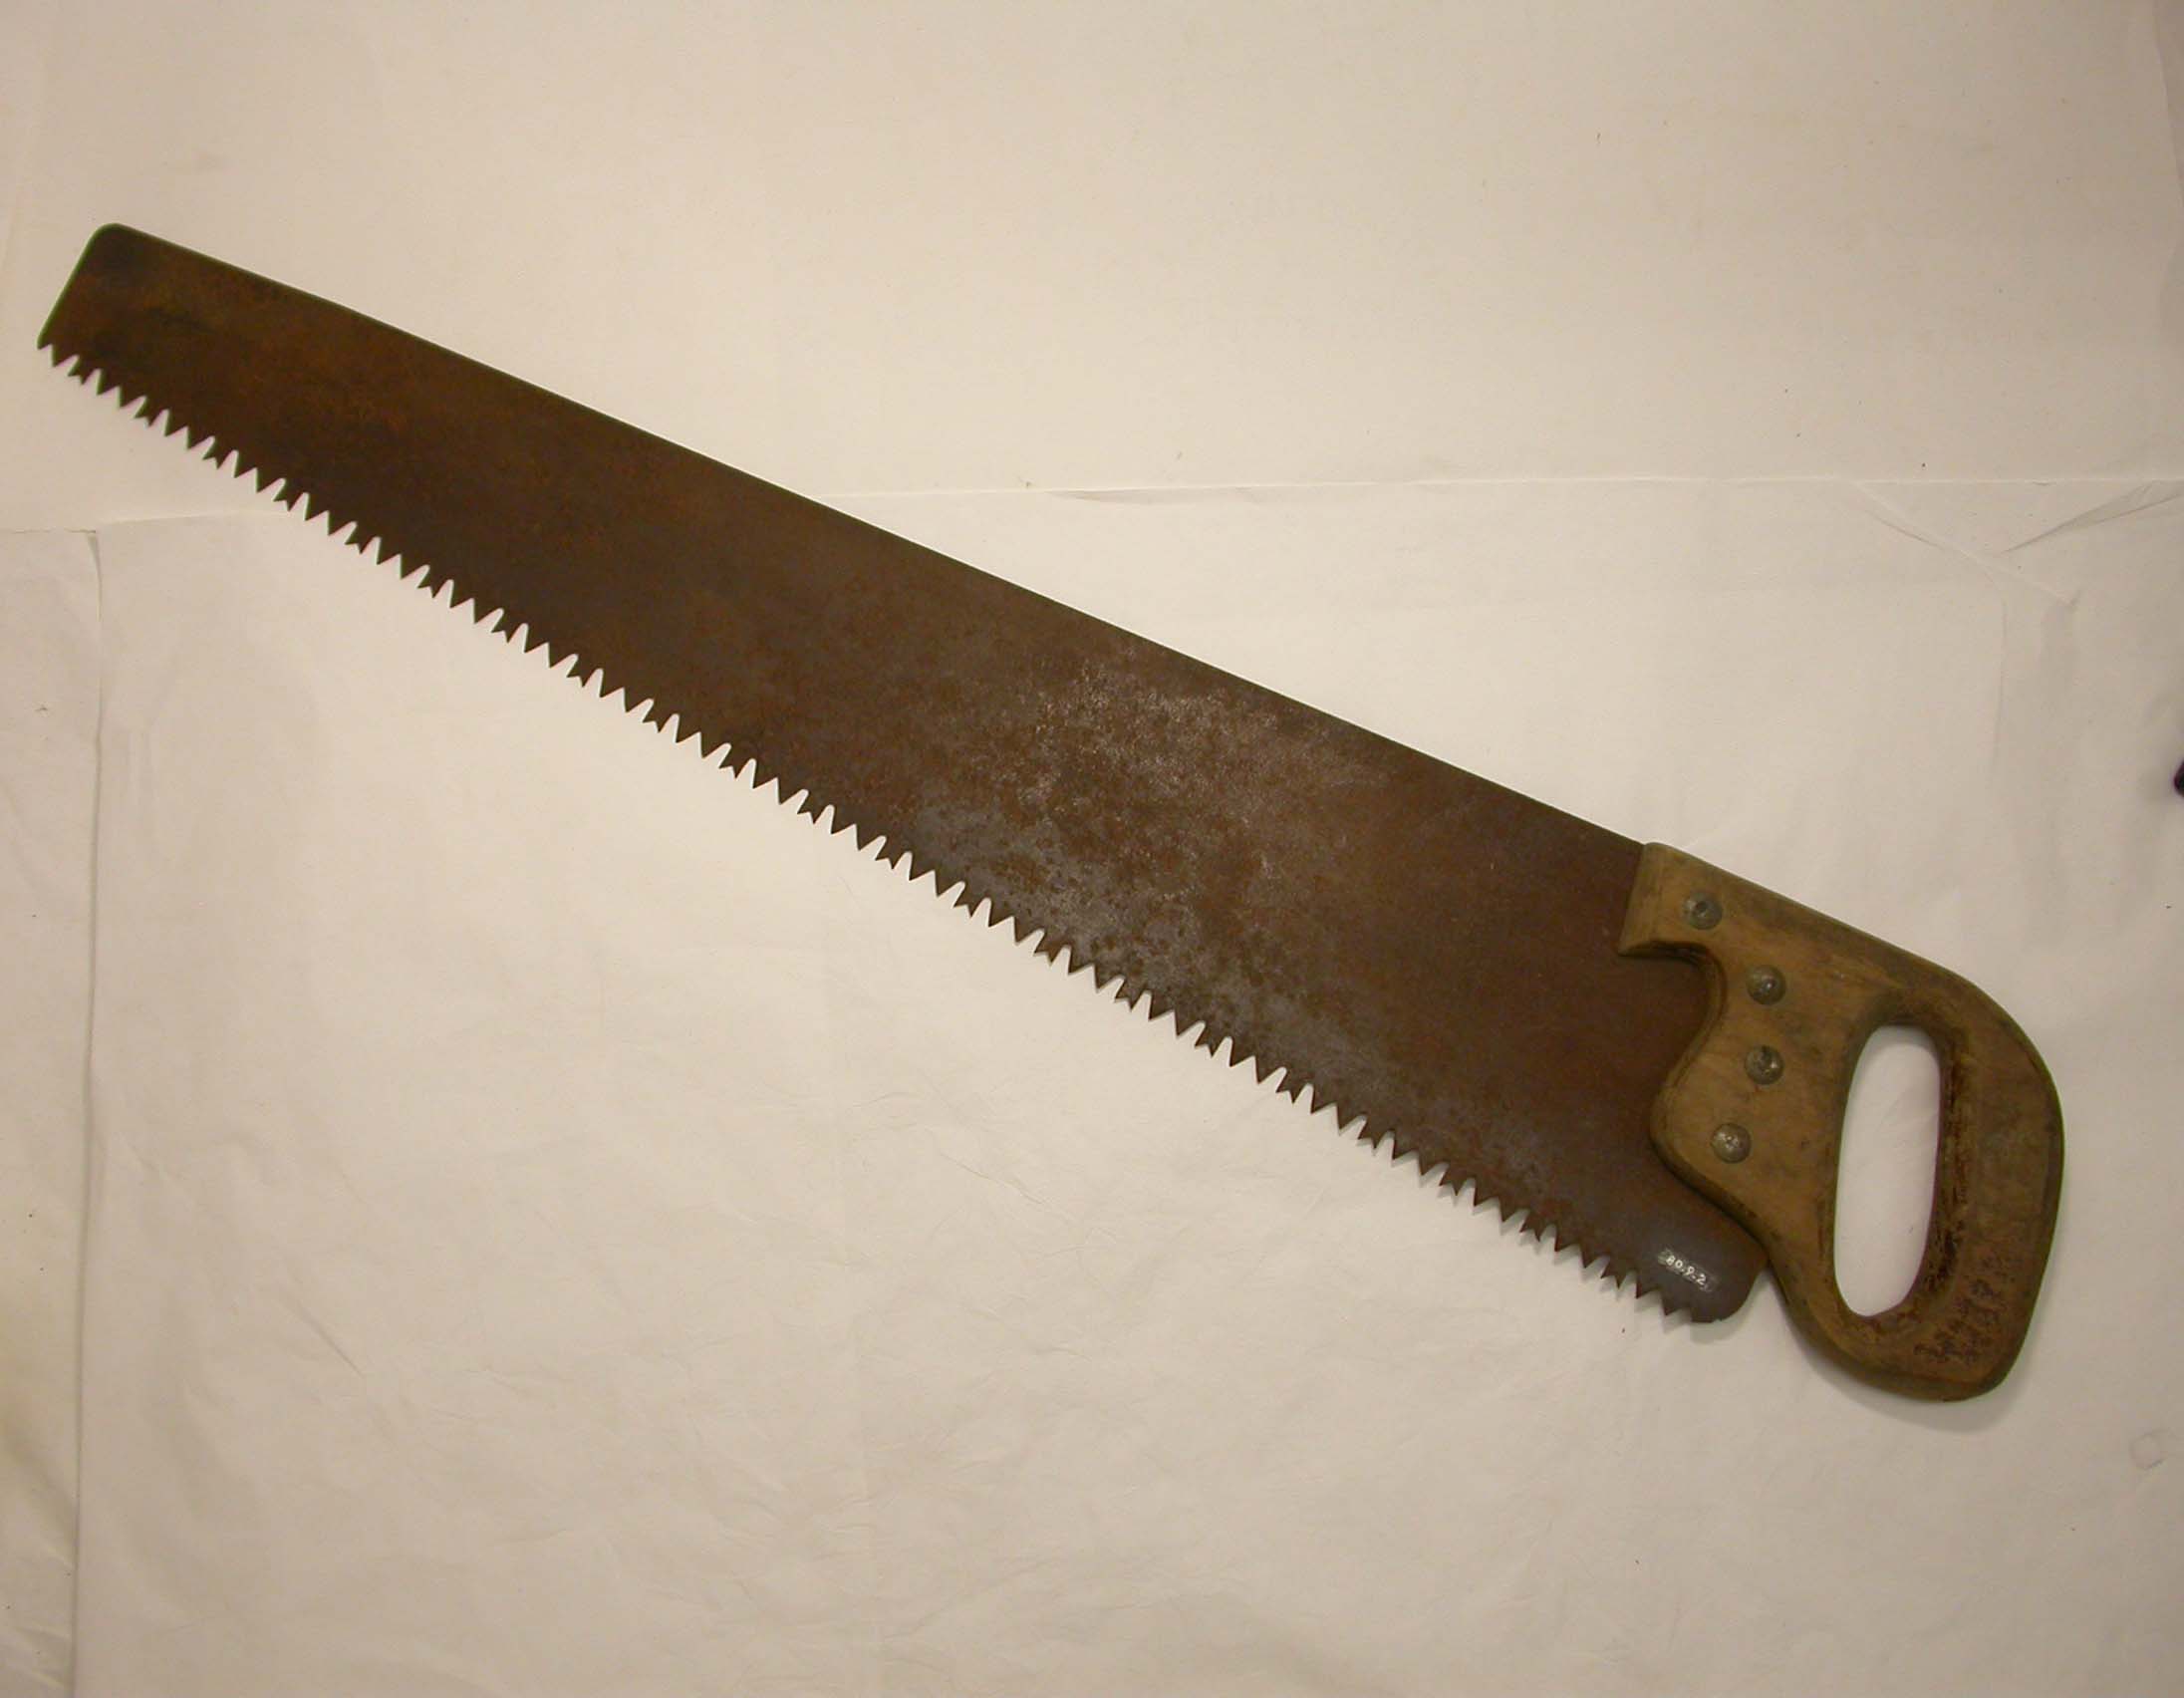 a%20crosscut%20saw%20with%20a%20wooden%20handle